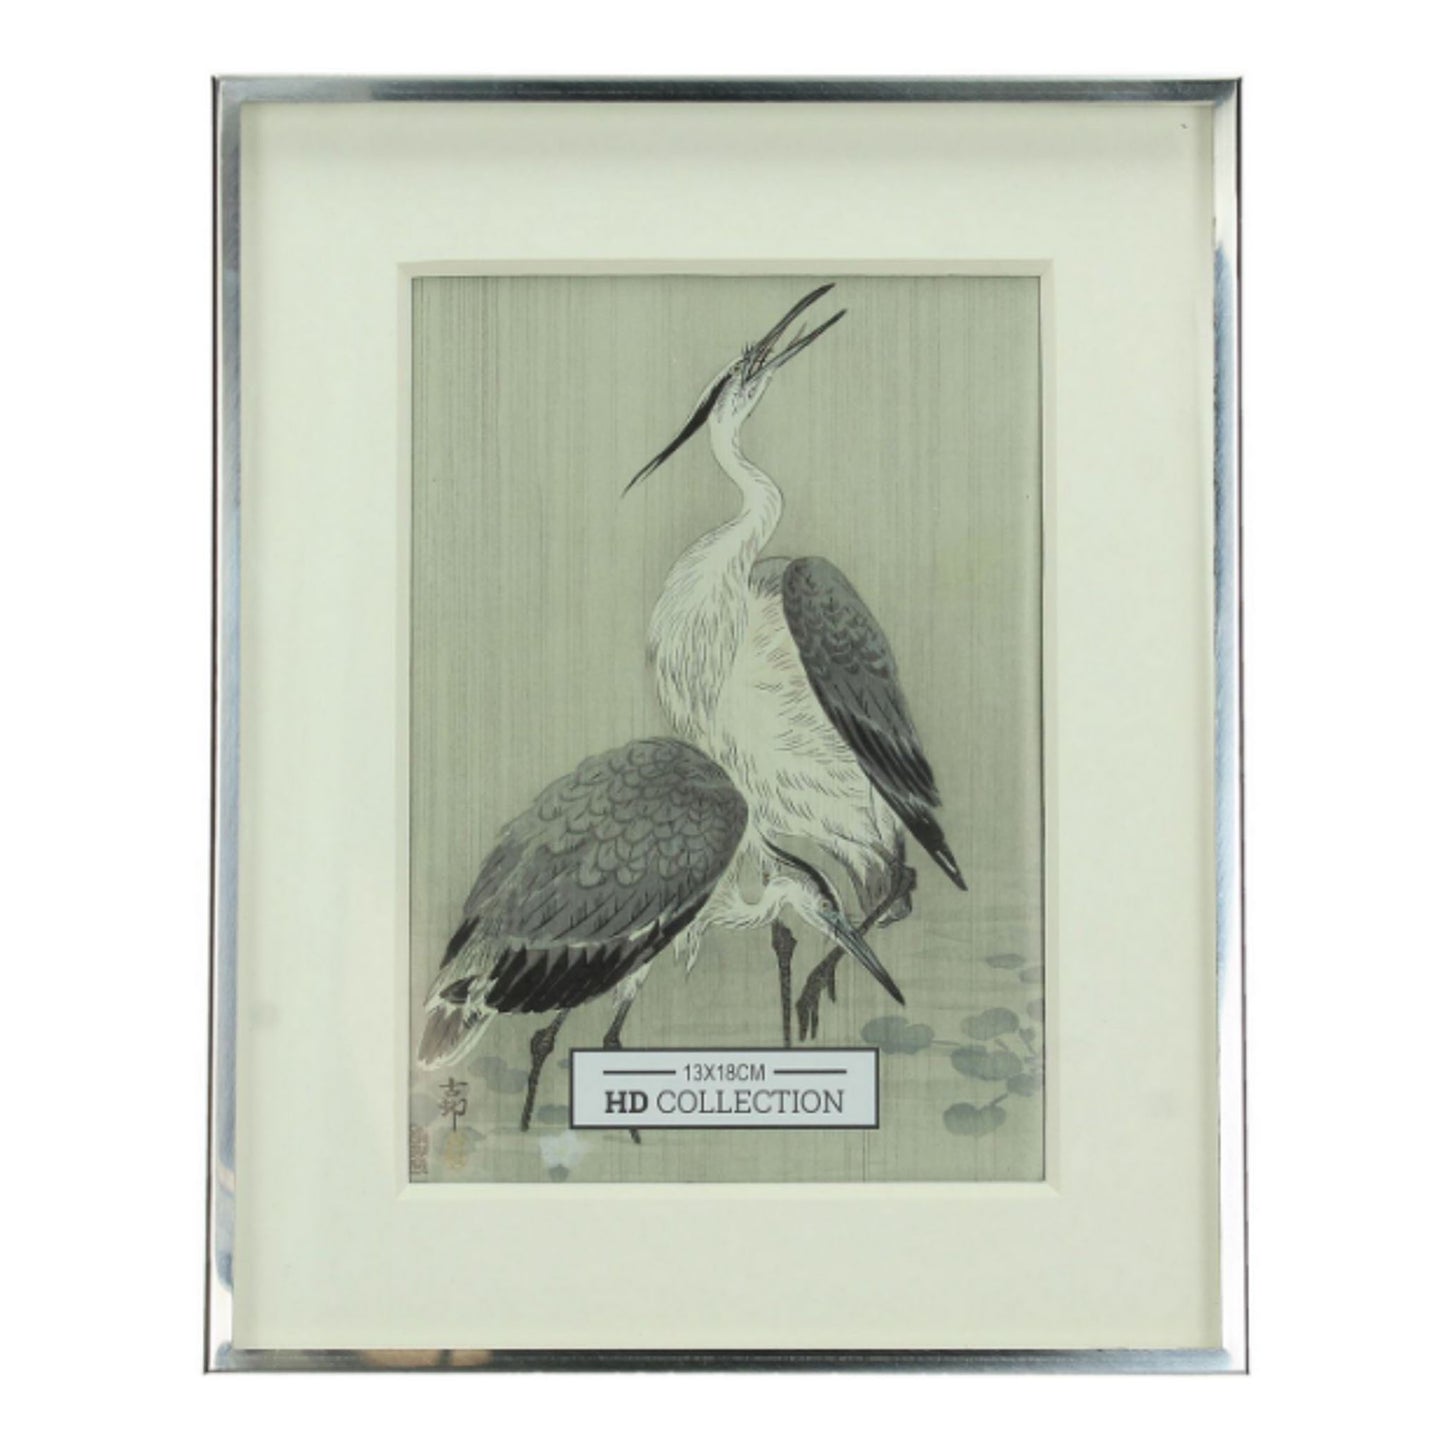 Classic Silver Photo Frame 7*5 inches